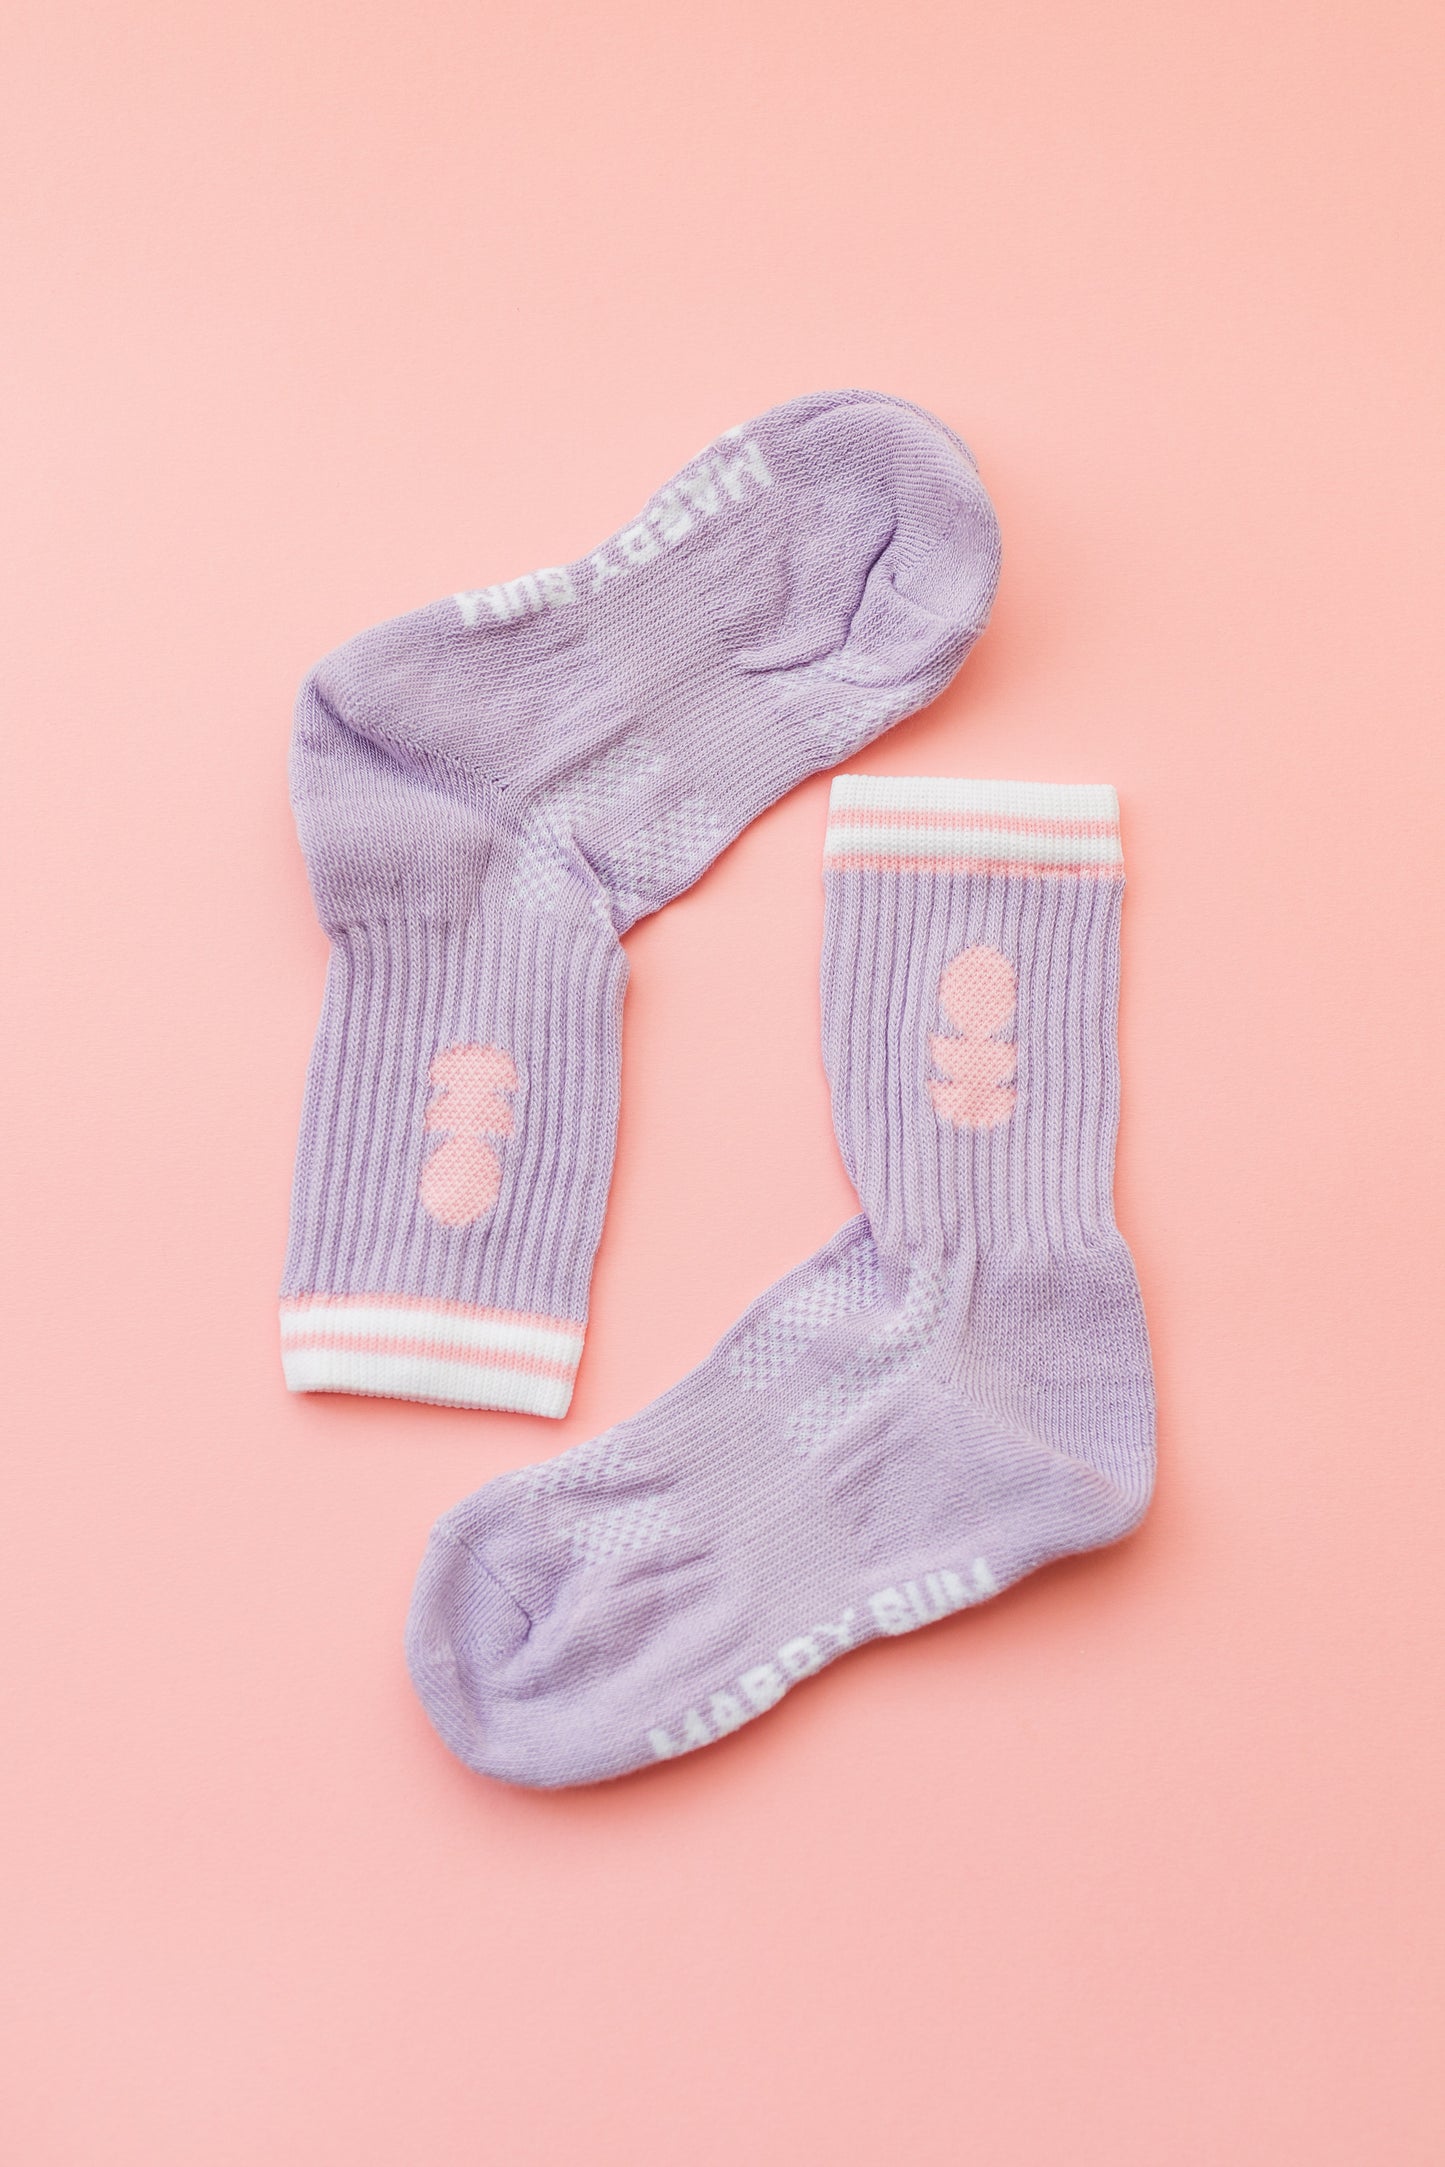 Lilac and Pink Sports Socks